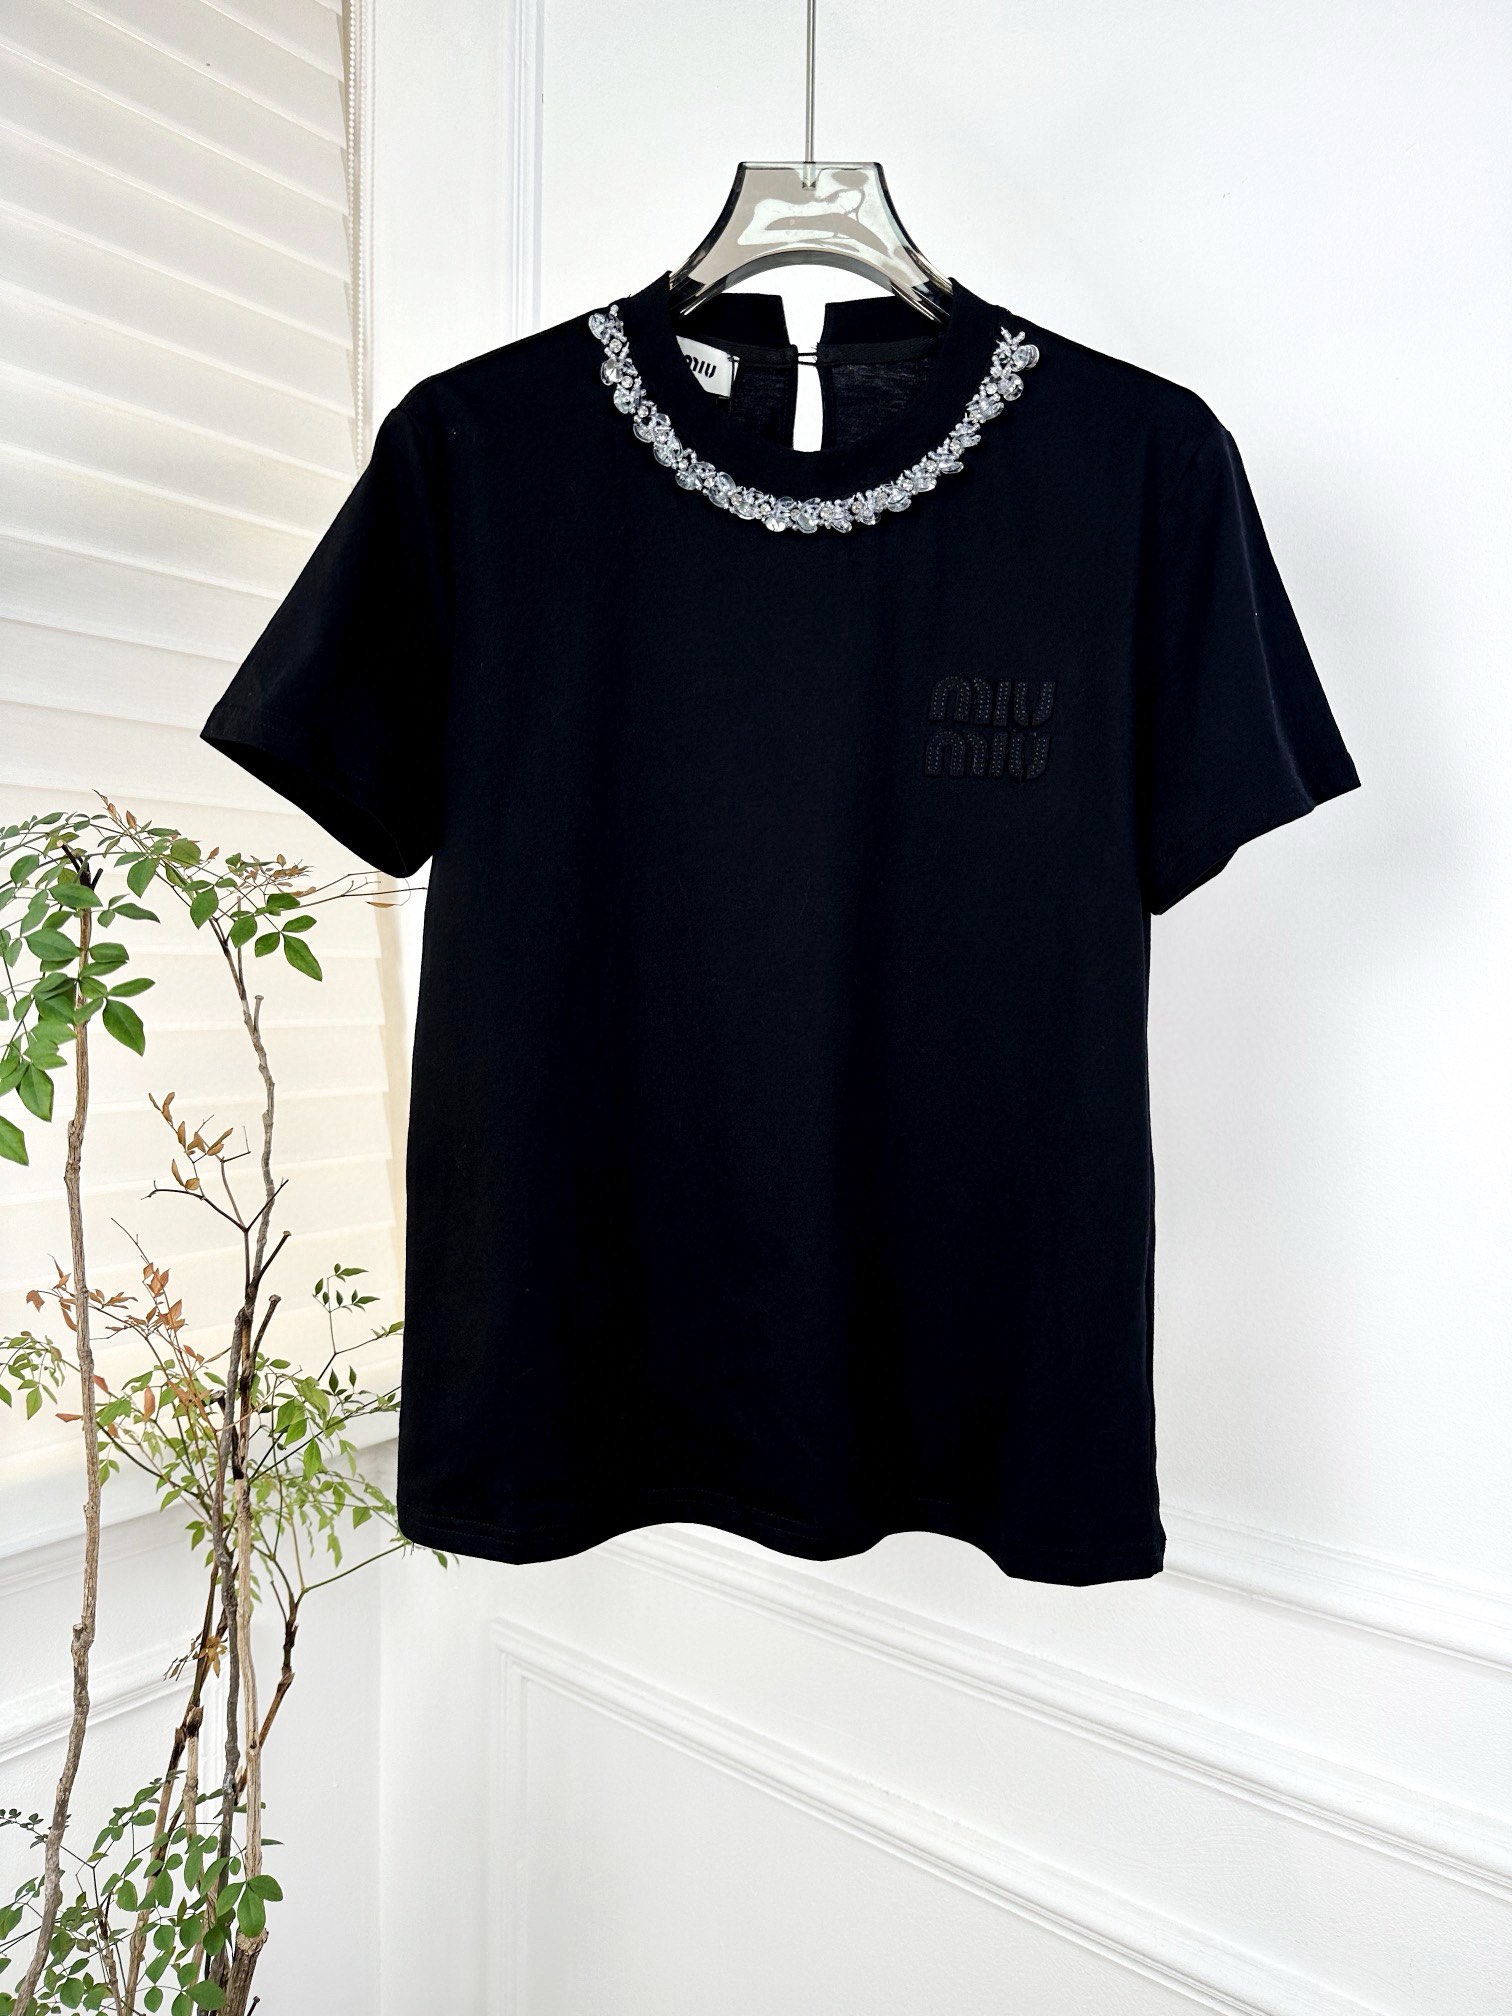 MiuMiu Clothing T-Shirt High Quality 1:1 Replica
 Black White Embroidery Spring Collection Short Sleeve SML838170